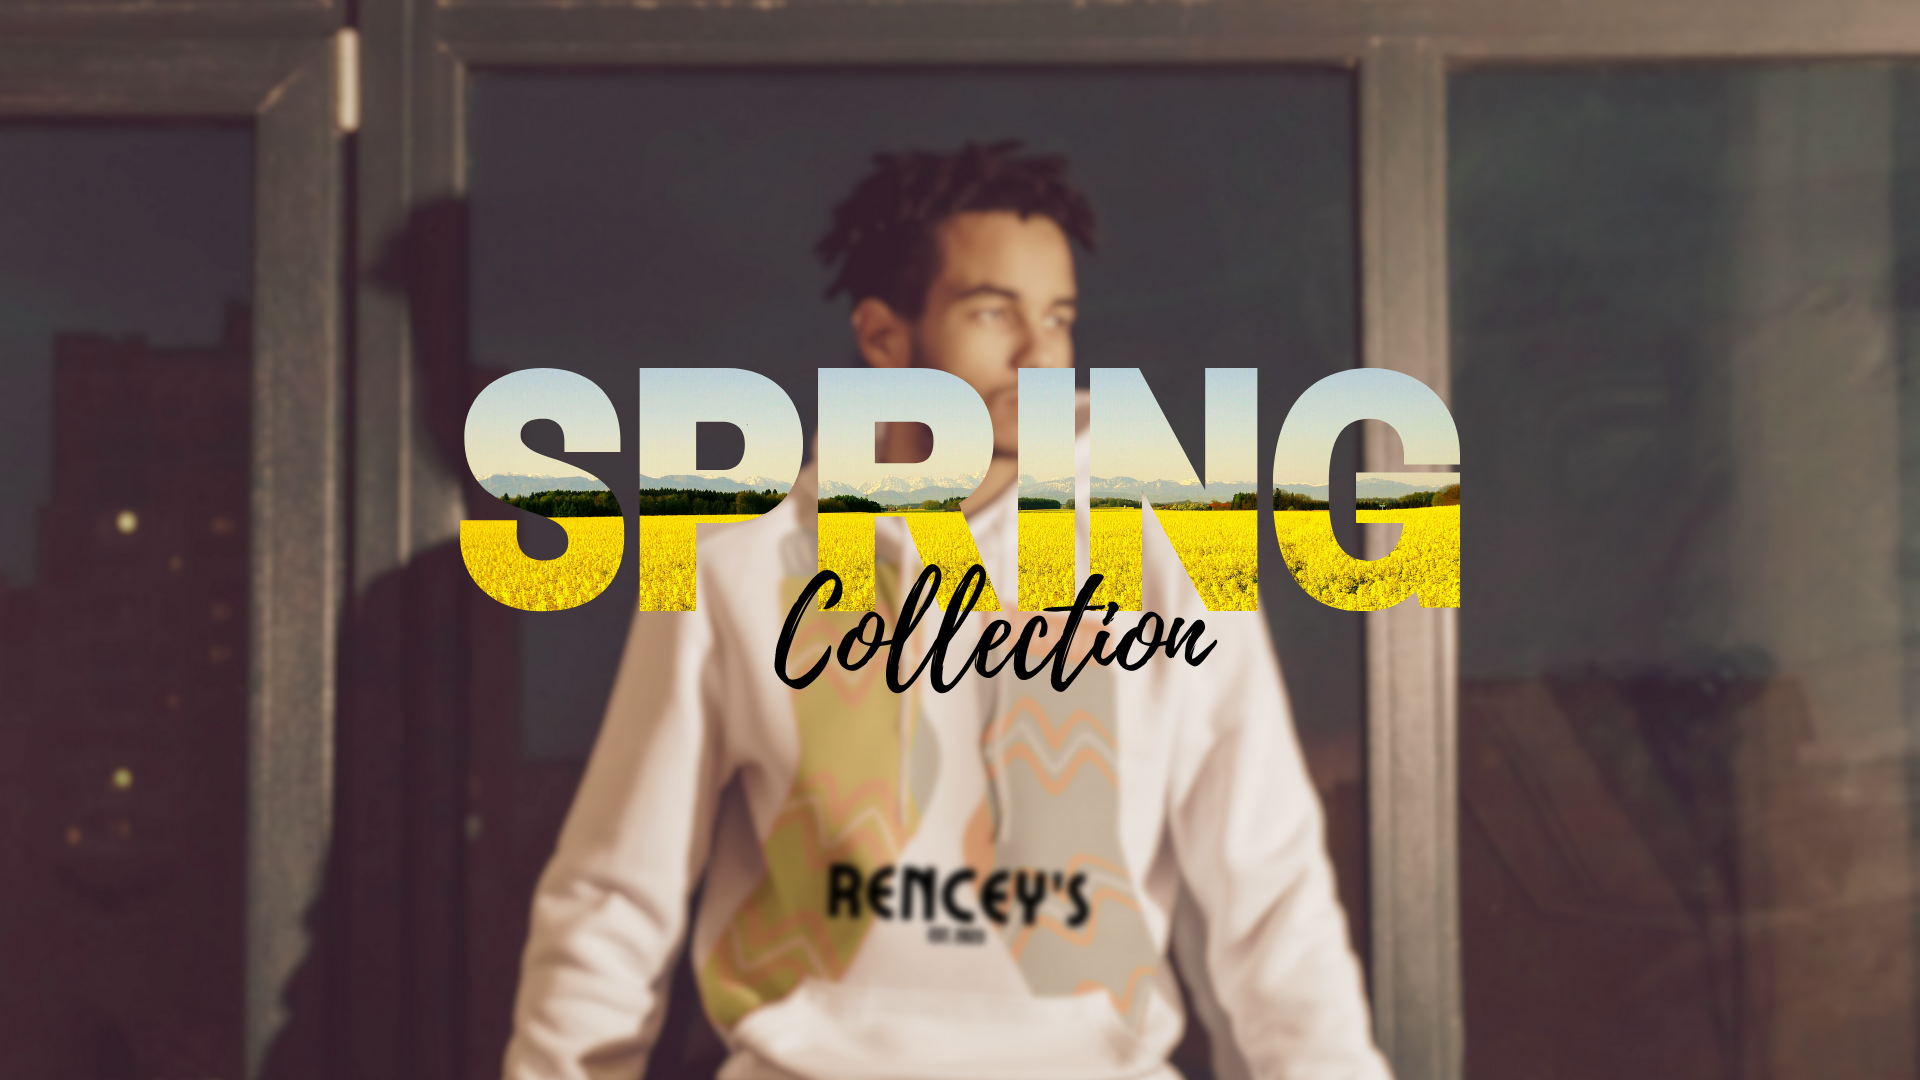 Renceys Spring Collection